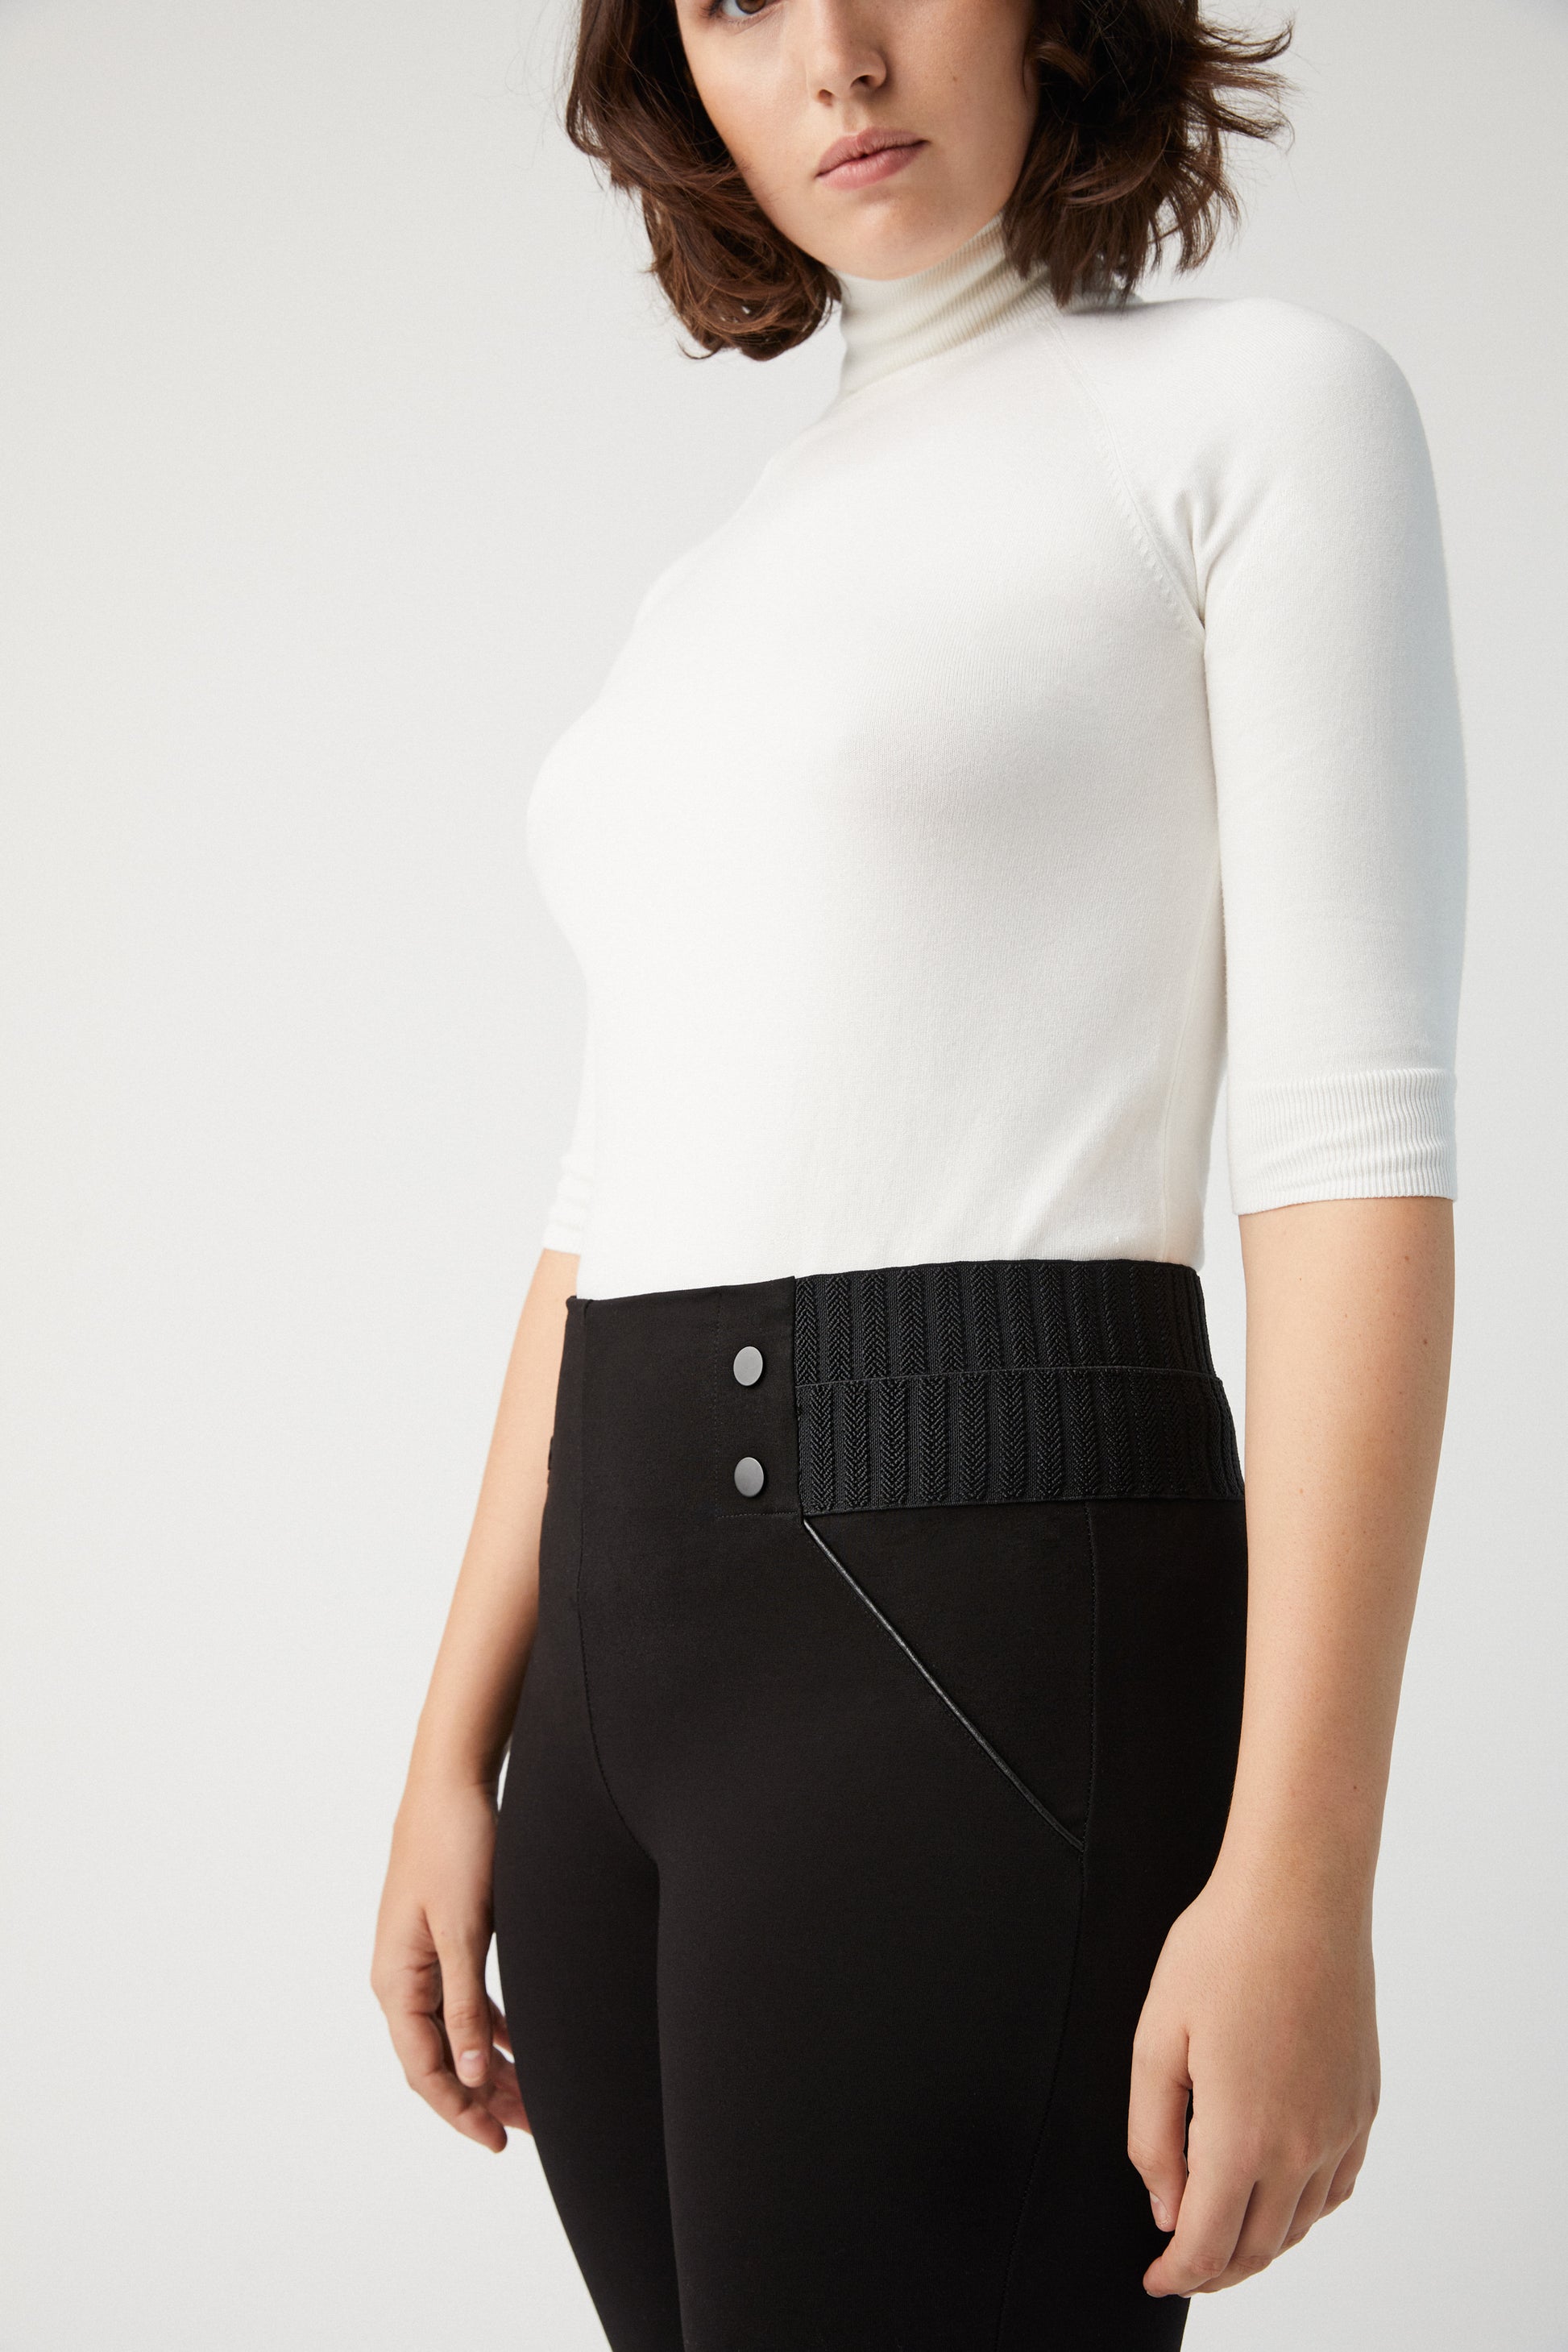 Ysabel Mora 70271 Leggings - High waisted trouser leggings with black faux buttons on the sides and deep ribbed textured elasticated slimming waistband.